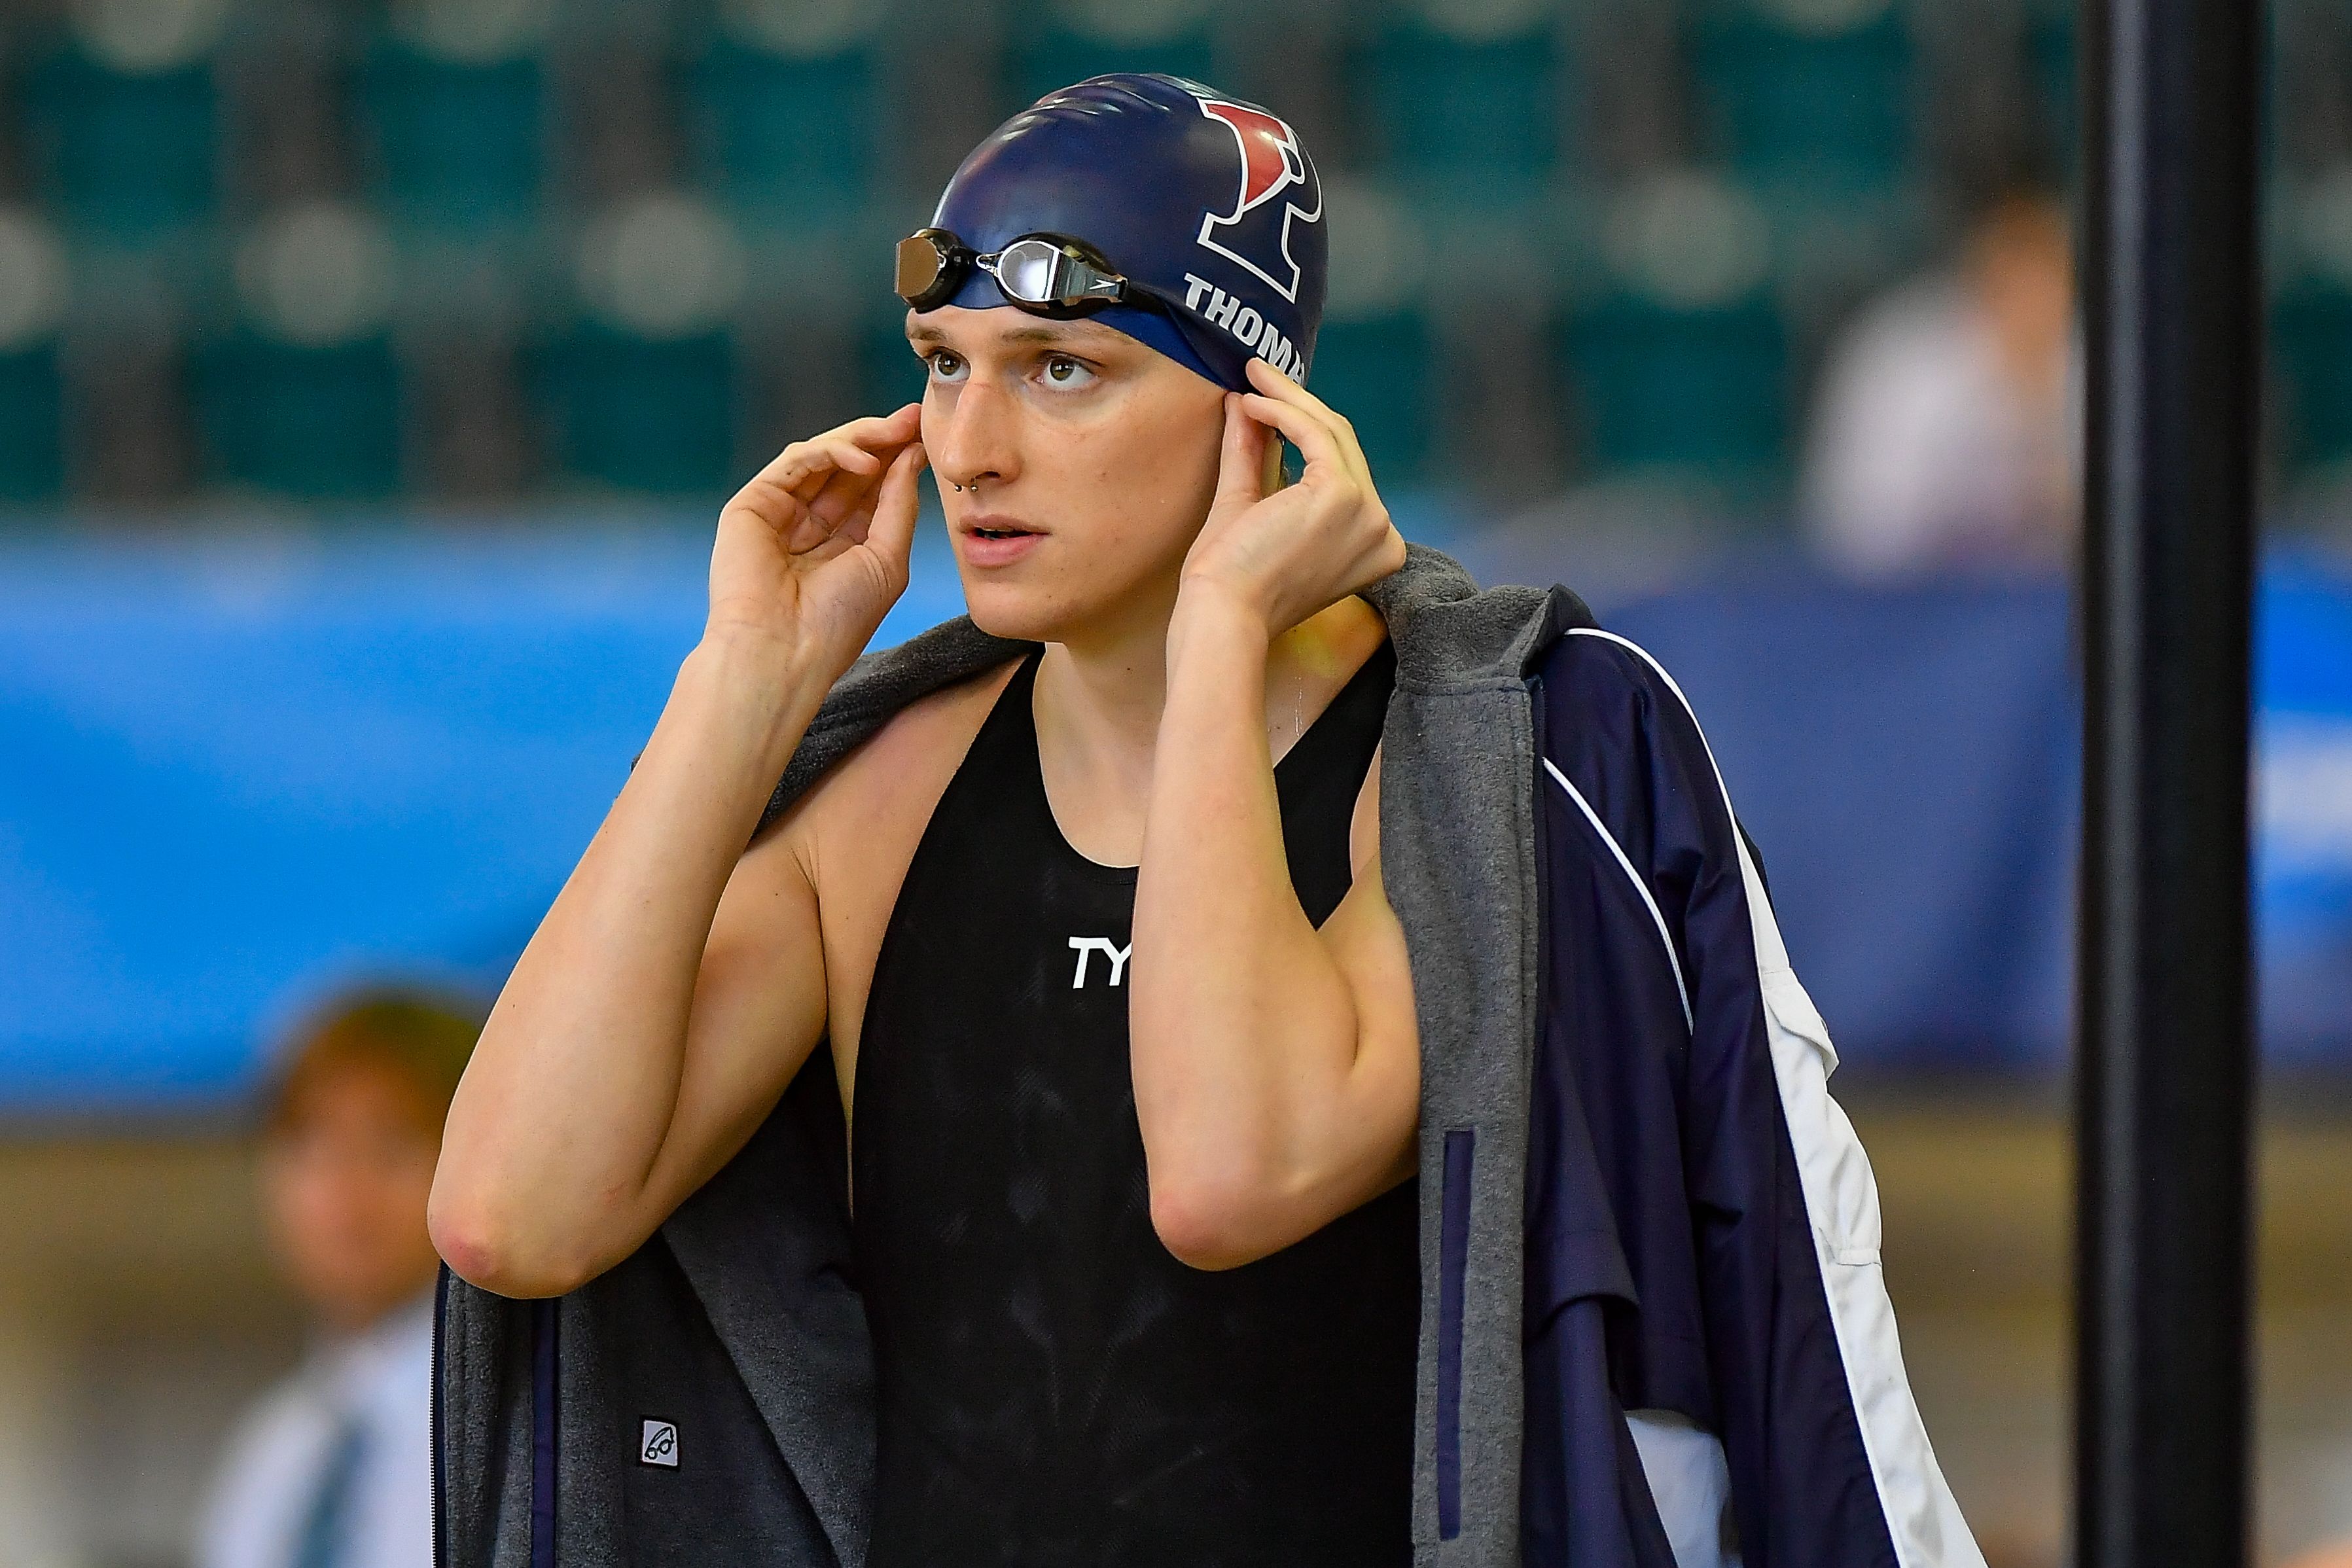 Gaines has “good experience” in U.S. Olympic Trials